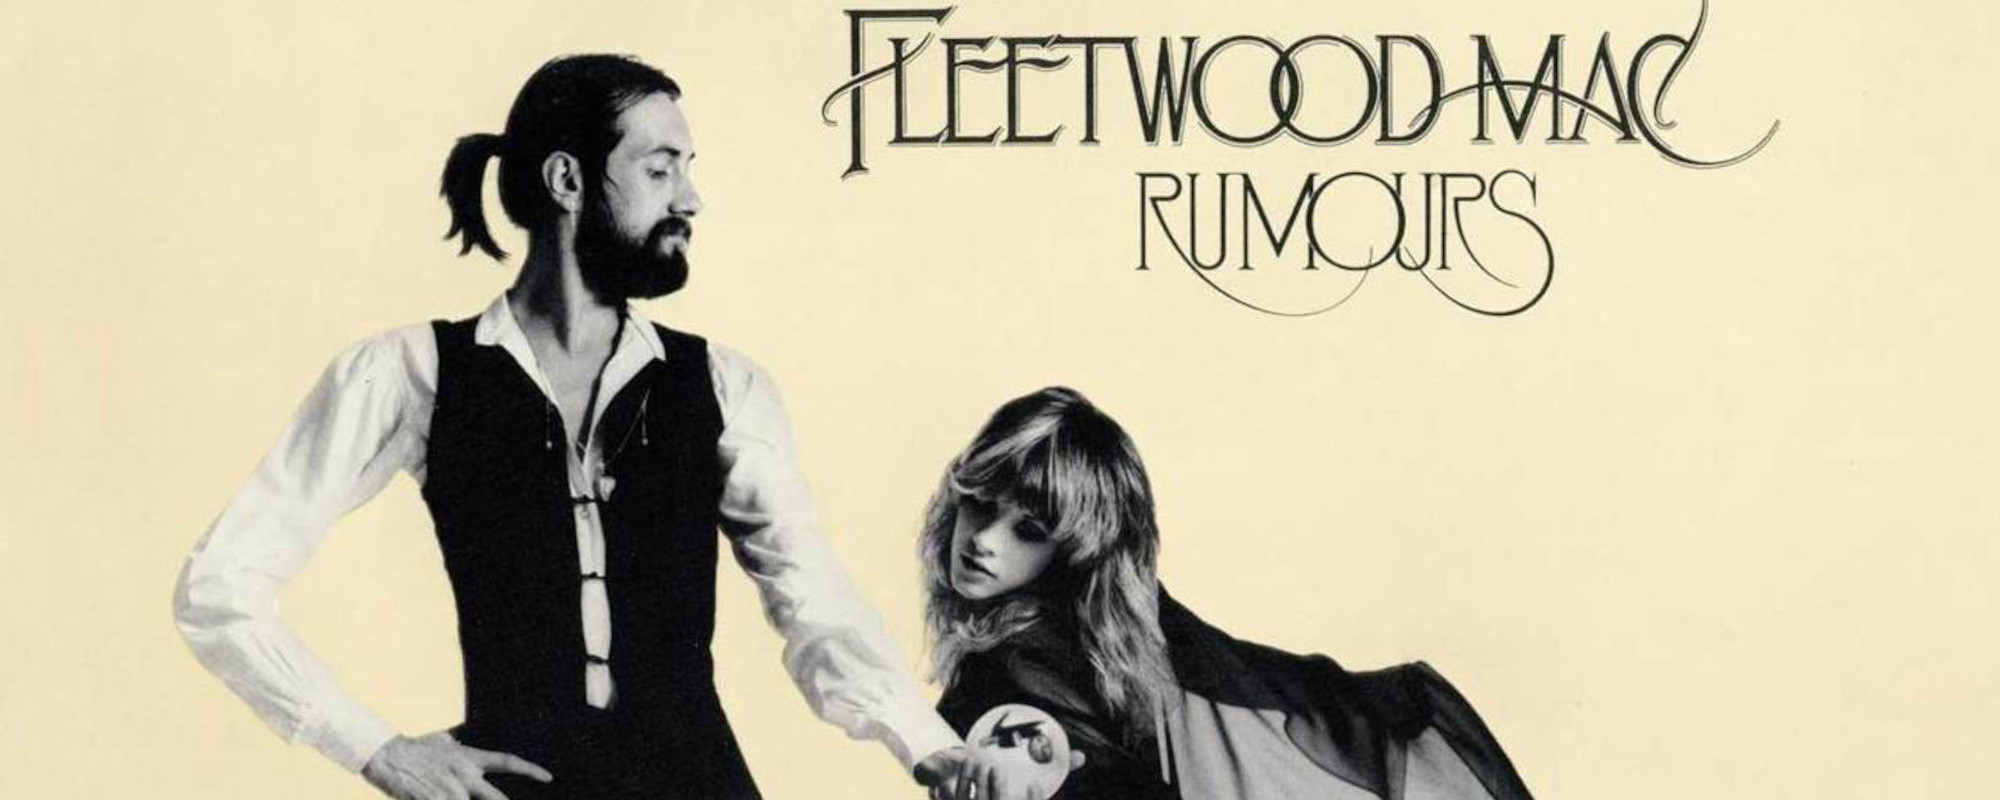 The Story Behind Fleetwood Mac’s ‘Rumours’ Album Cover